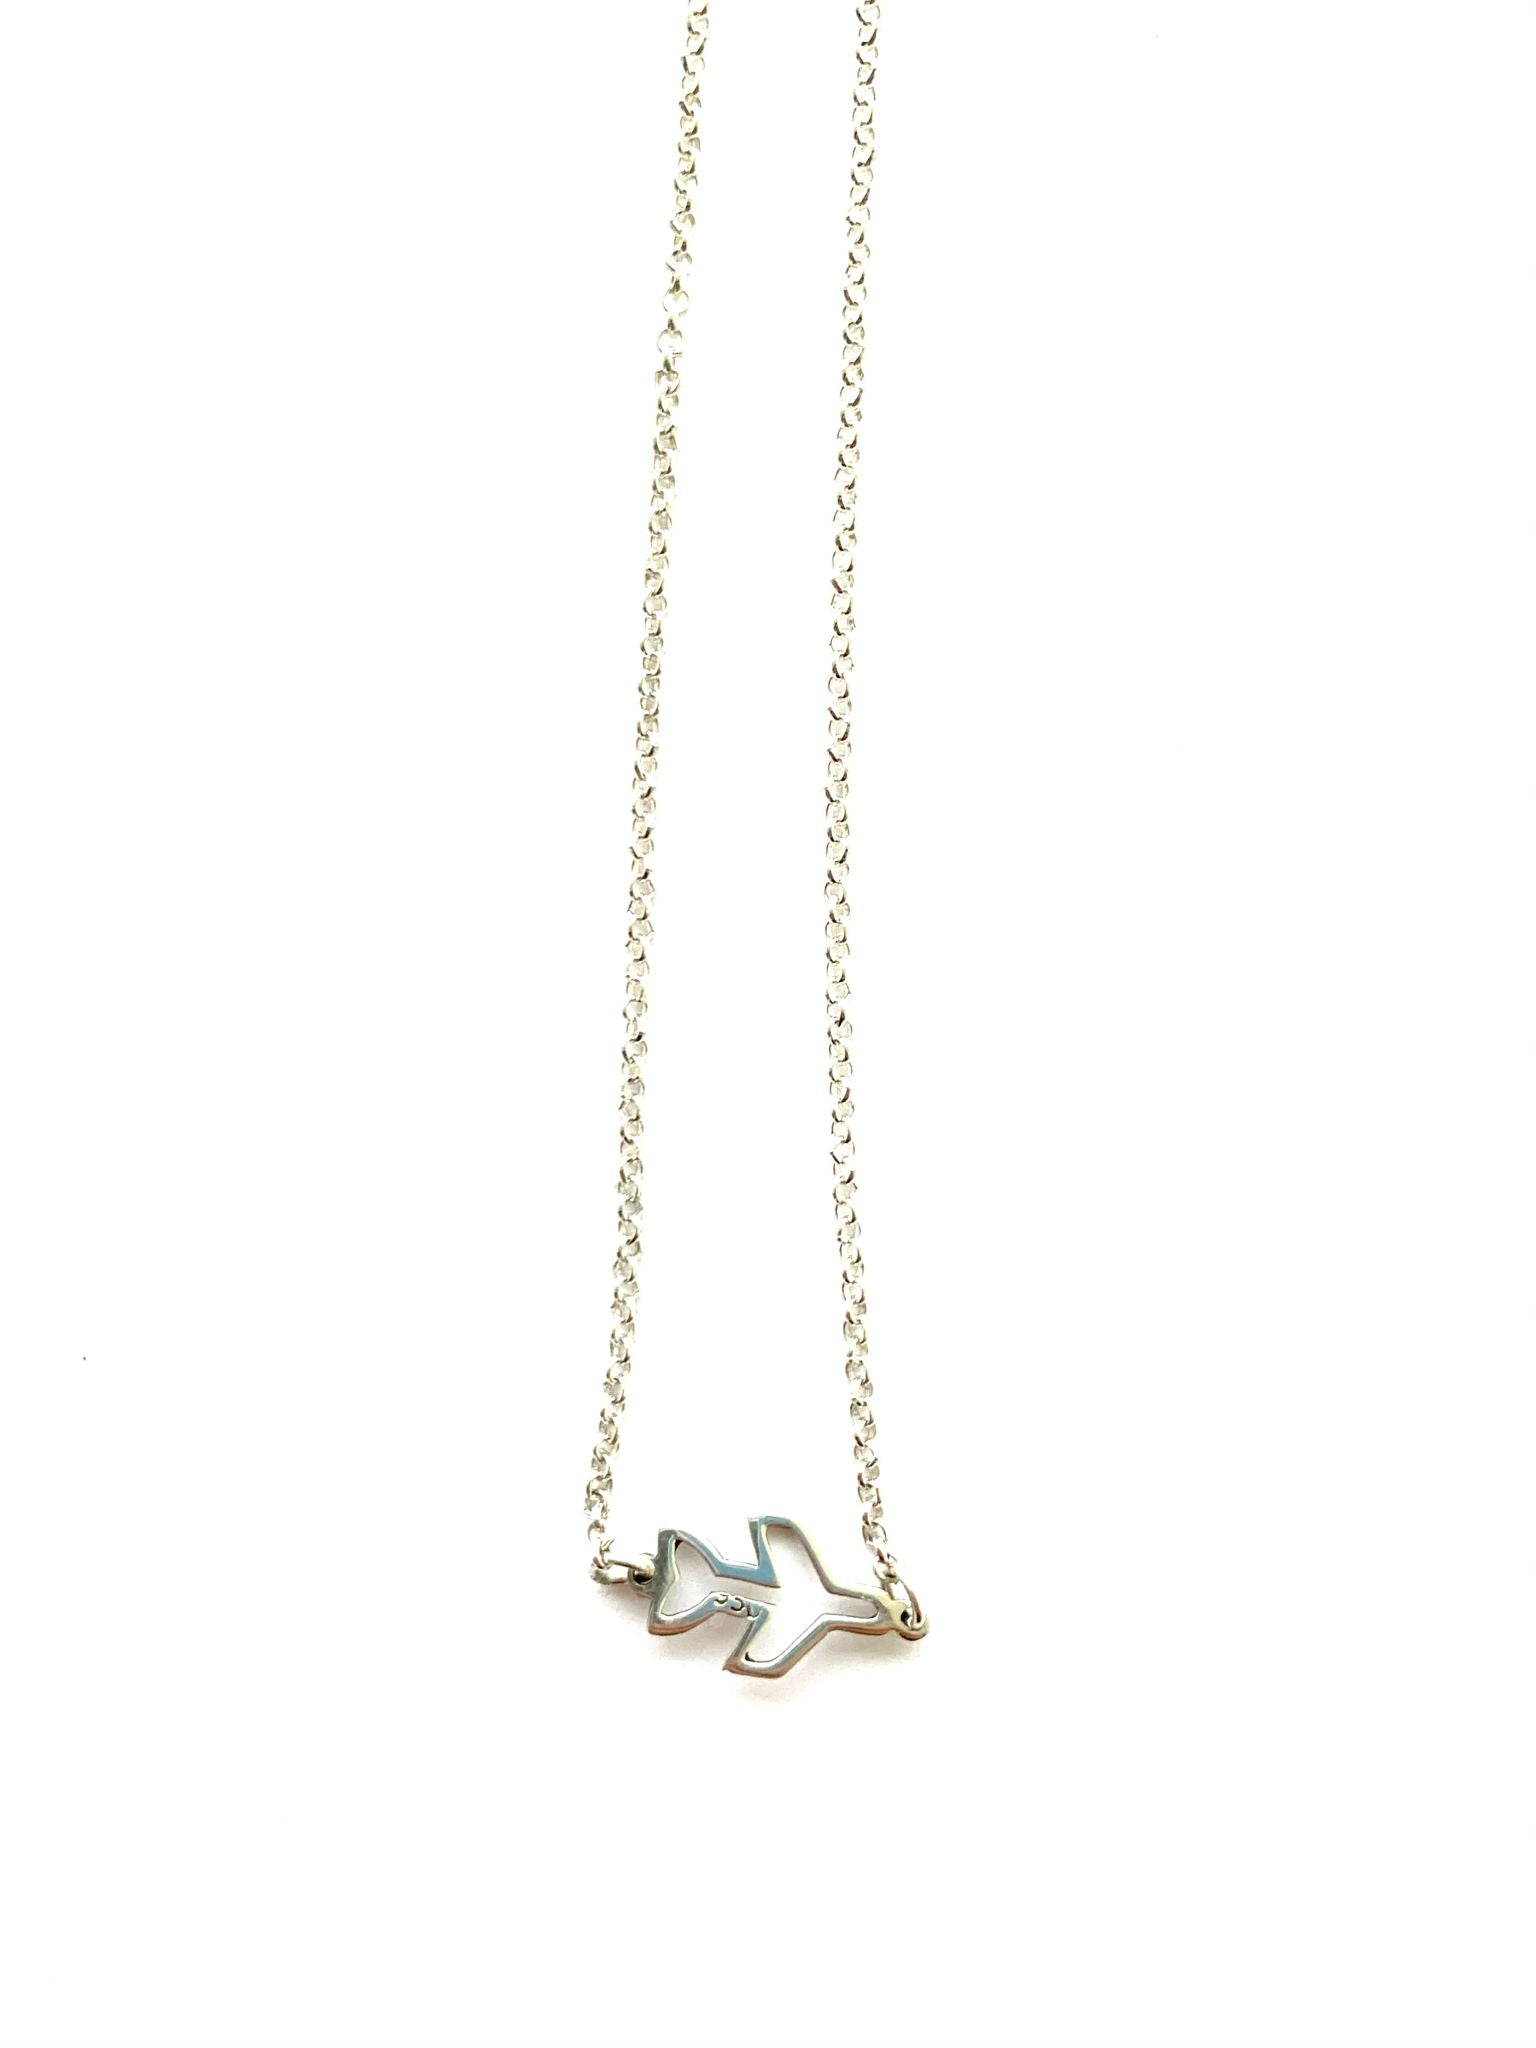 Airplane necklace 9